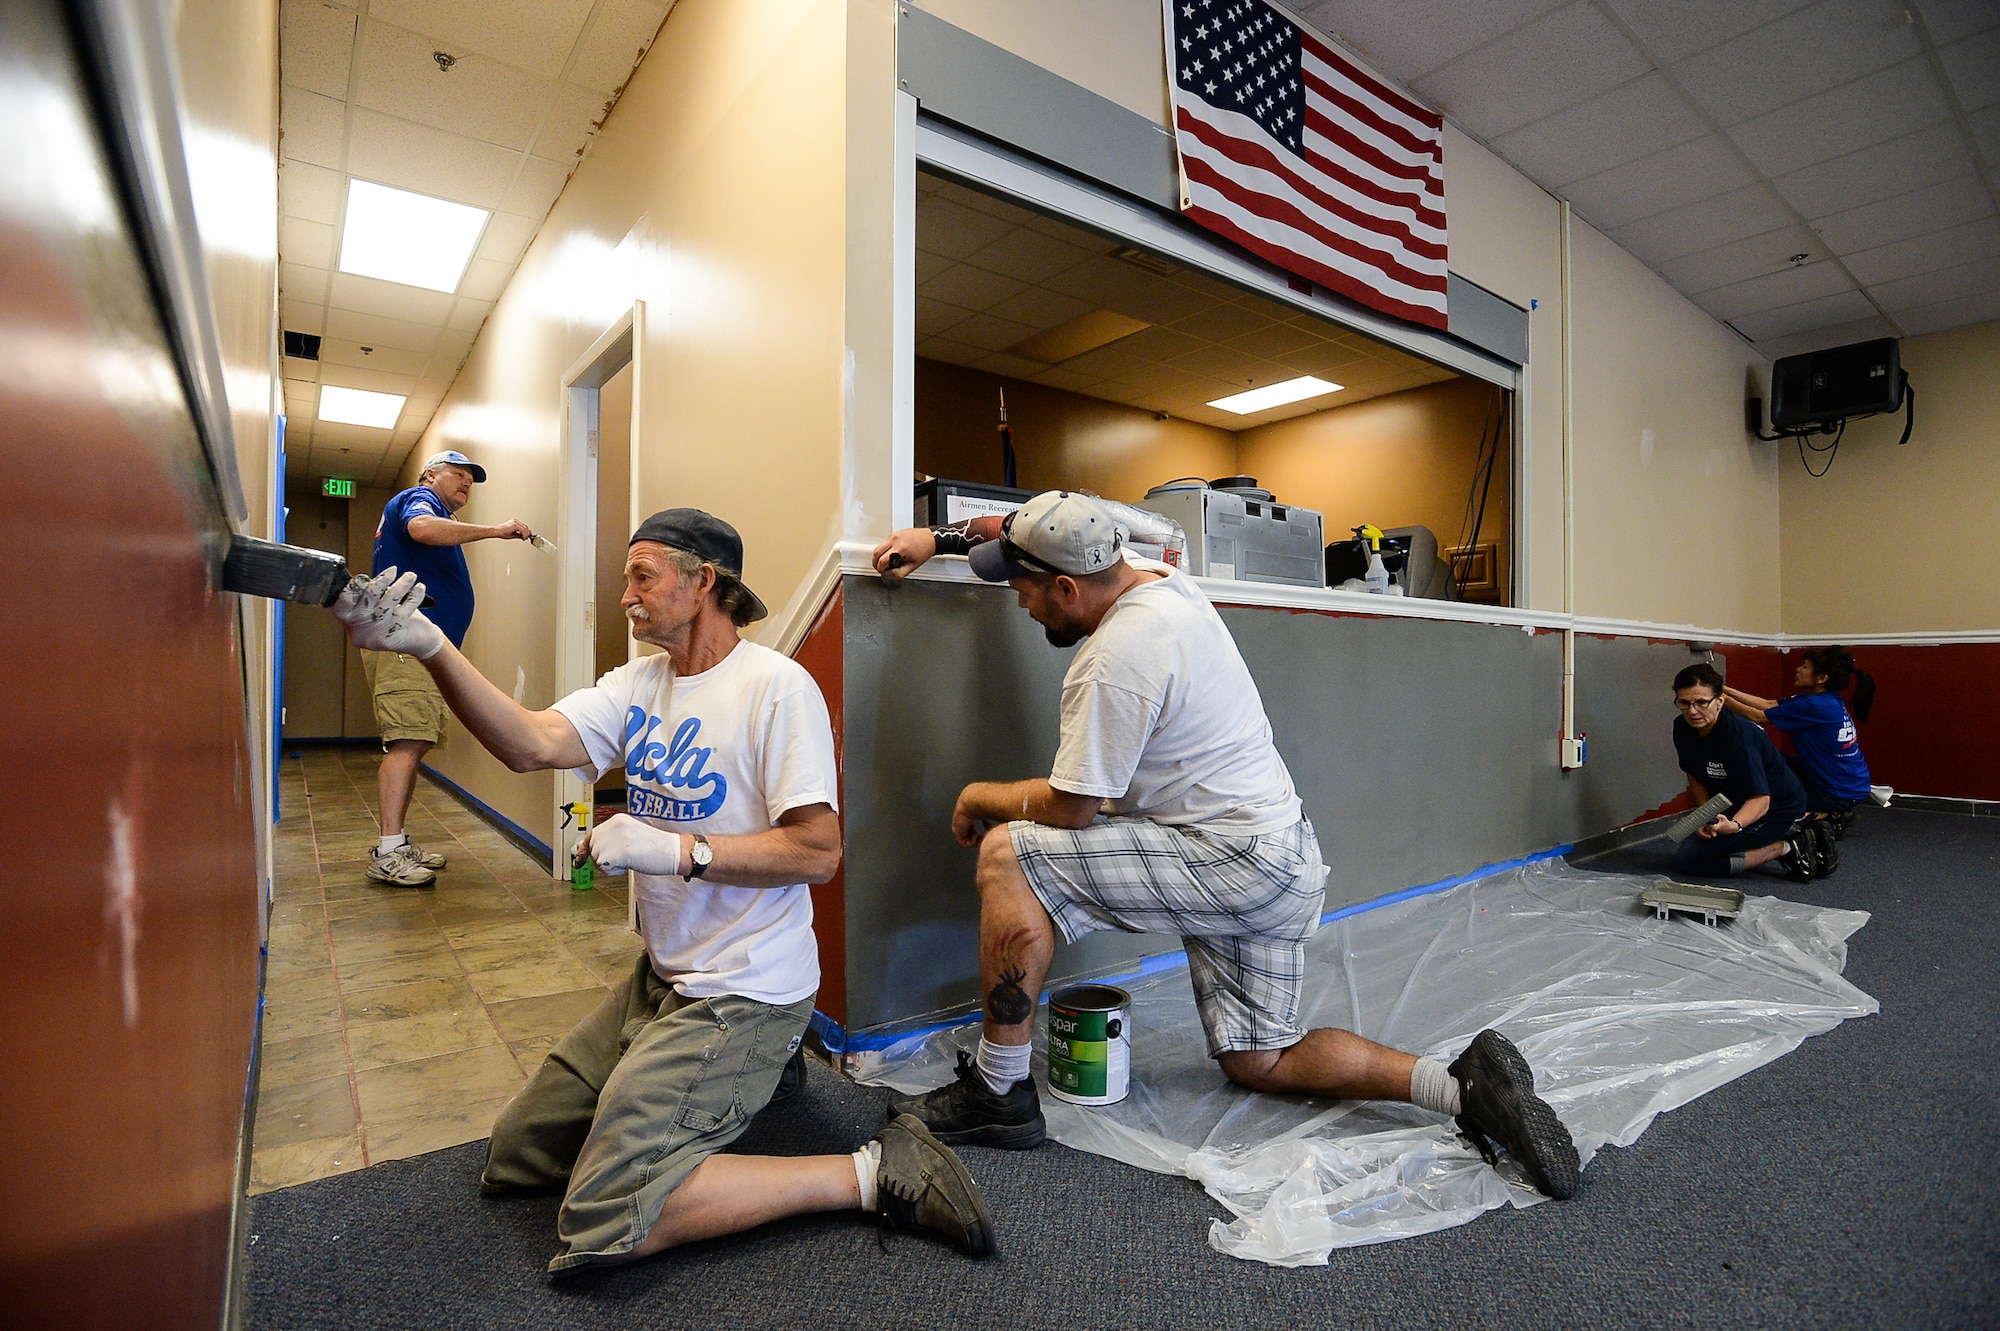 Layton Lowe’s employees paint the walls of the Airman Recreation Center, Hill Air Force Base, Utah, as part of a community relations project, Sept. 13, 2016. (U.S. Air Force photo by R. Nial Bradshaw)